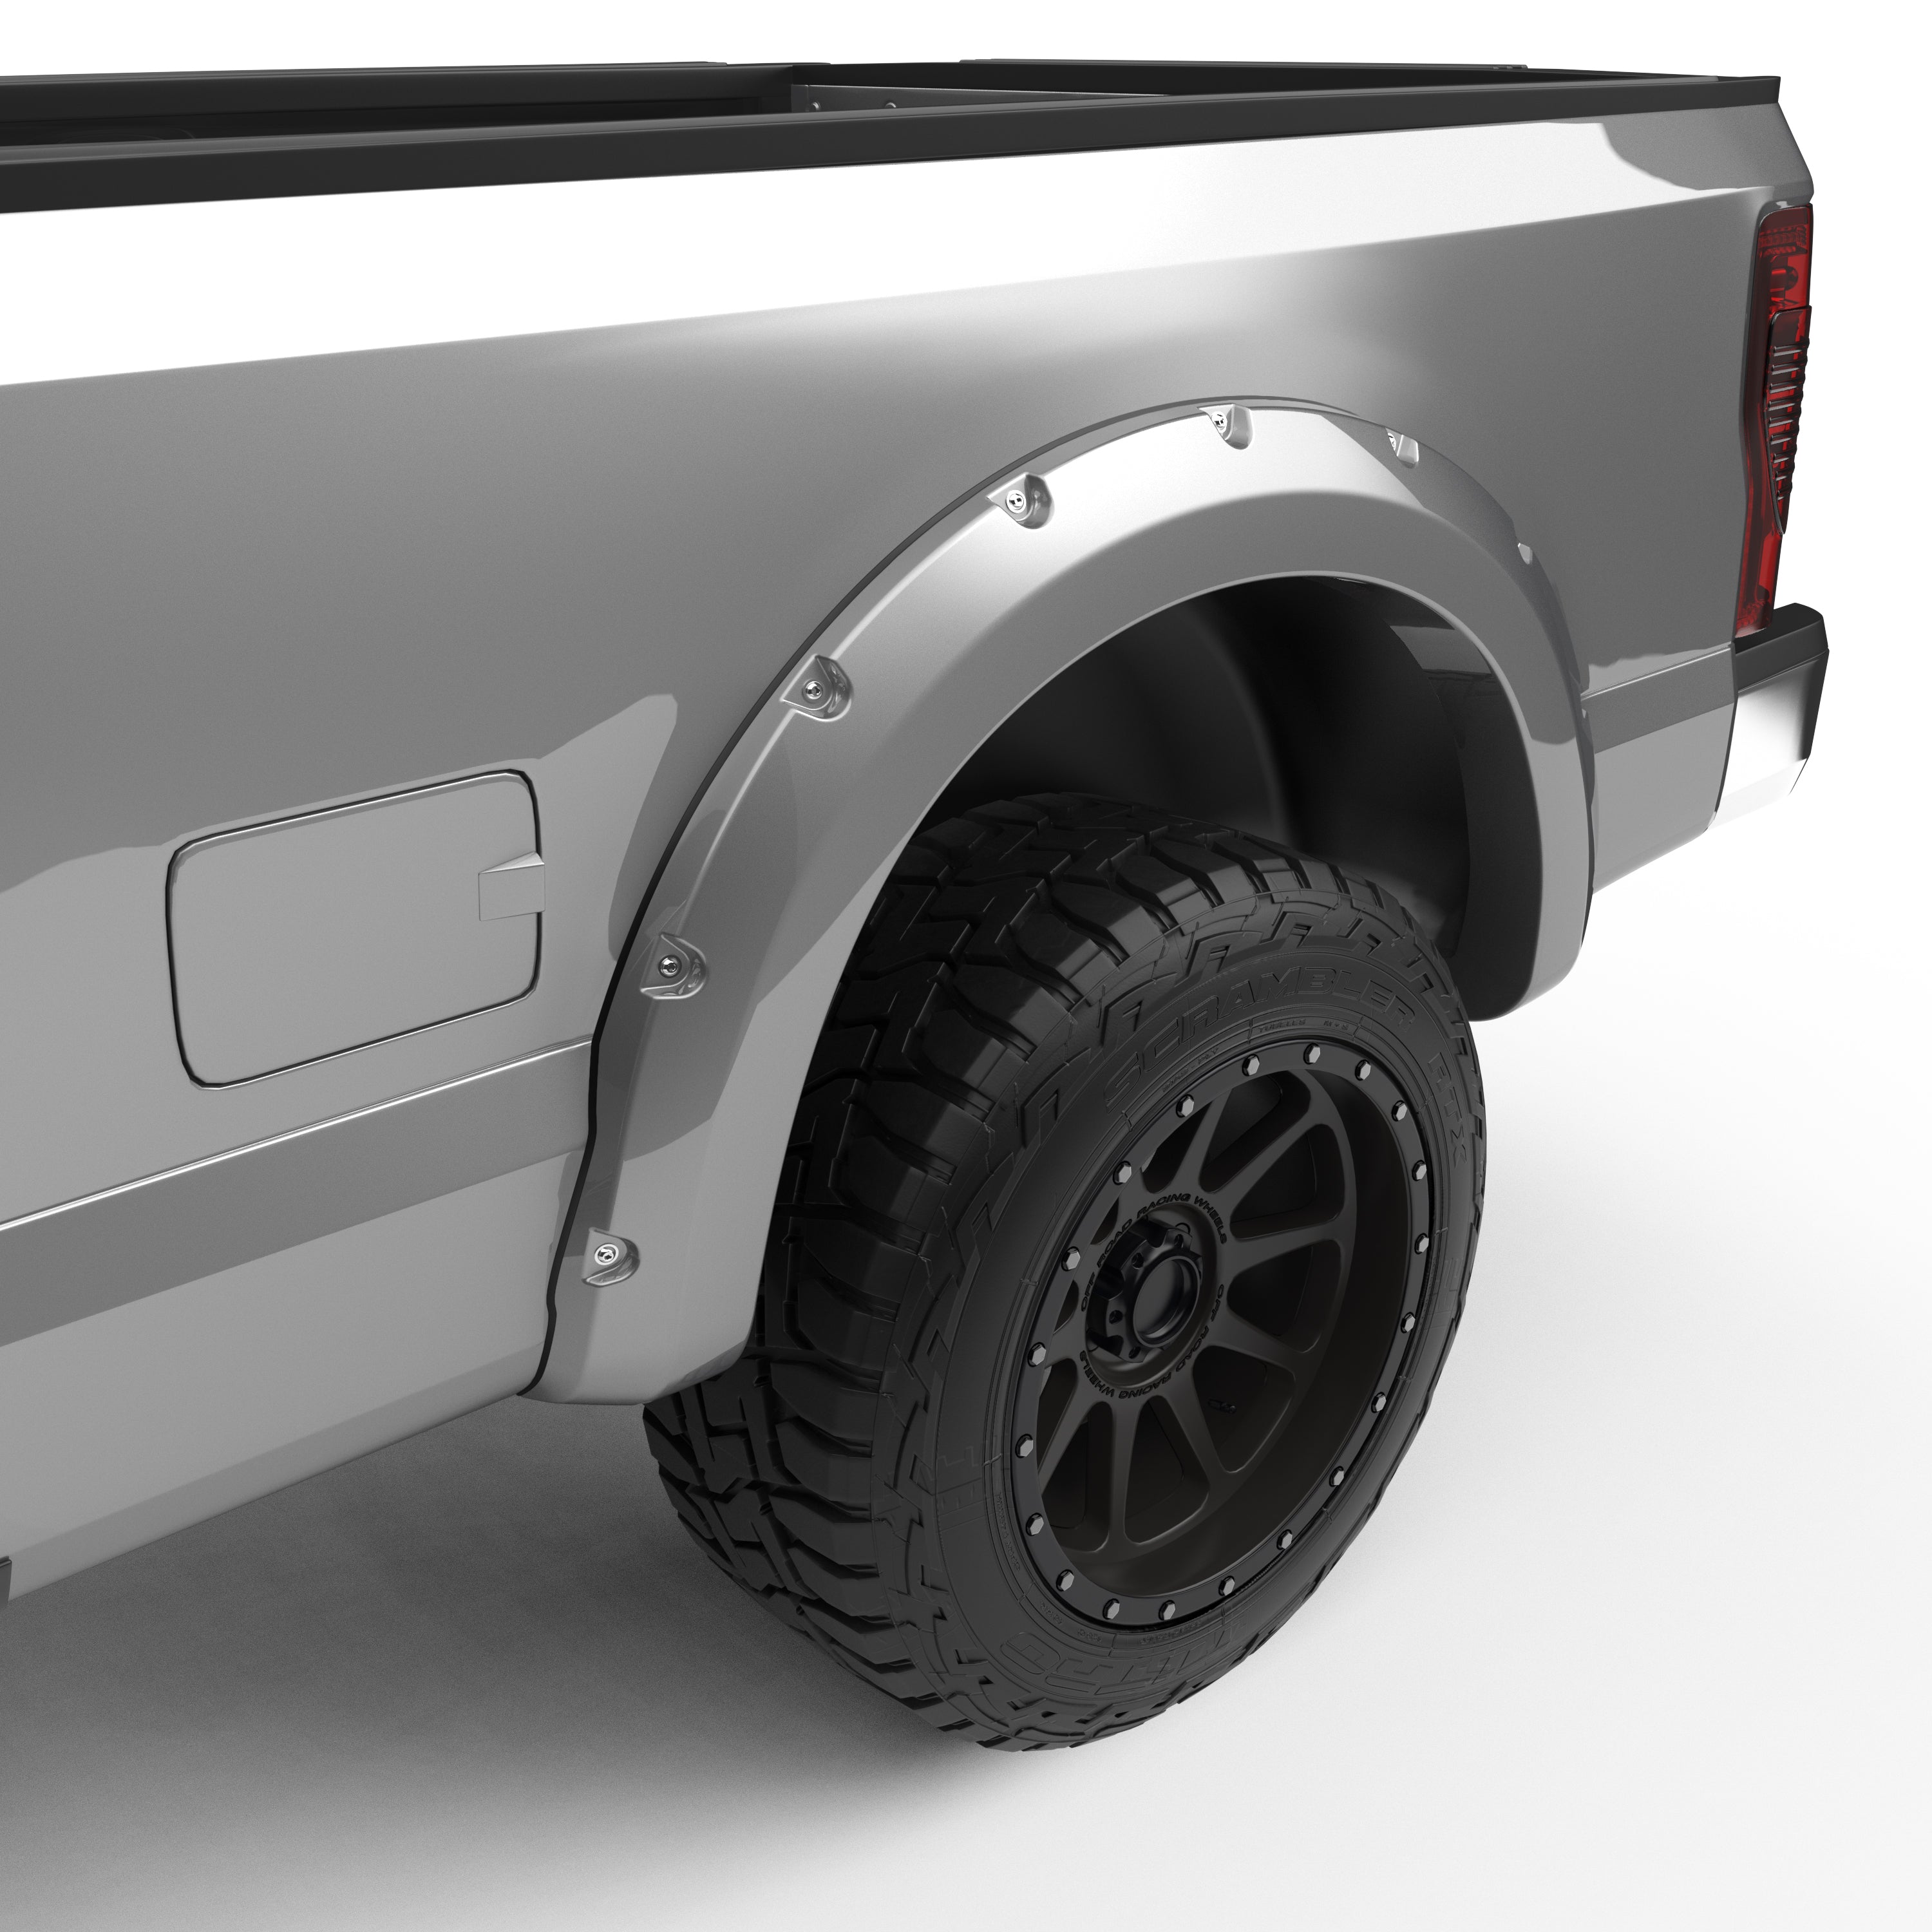 EGR 2011-2016 Ford F-250 F-350 Super Duty Extended Crew Standard Cab Pickup 2Door 4Door Painted To Code Ingot Silver Traditional Bolt-On Look Fender Flares 793814-UX